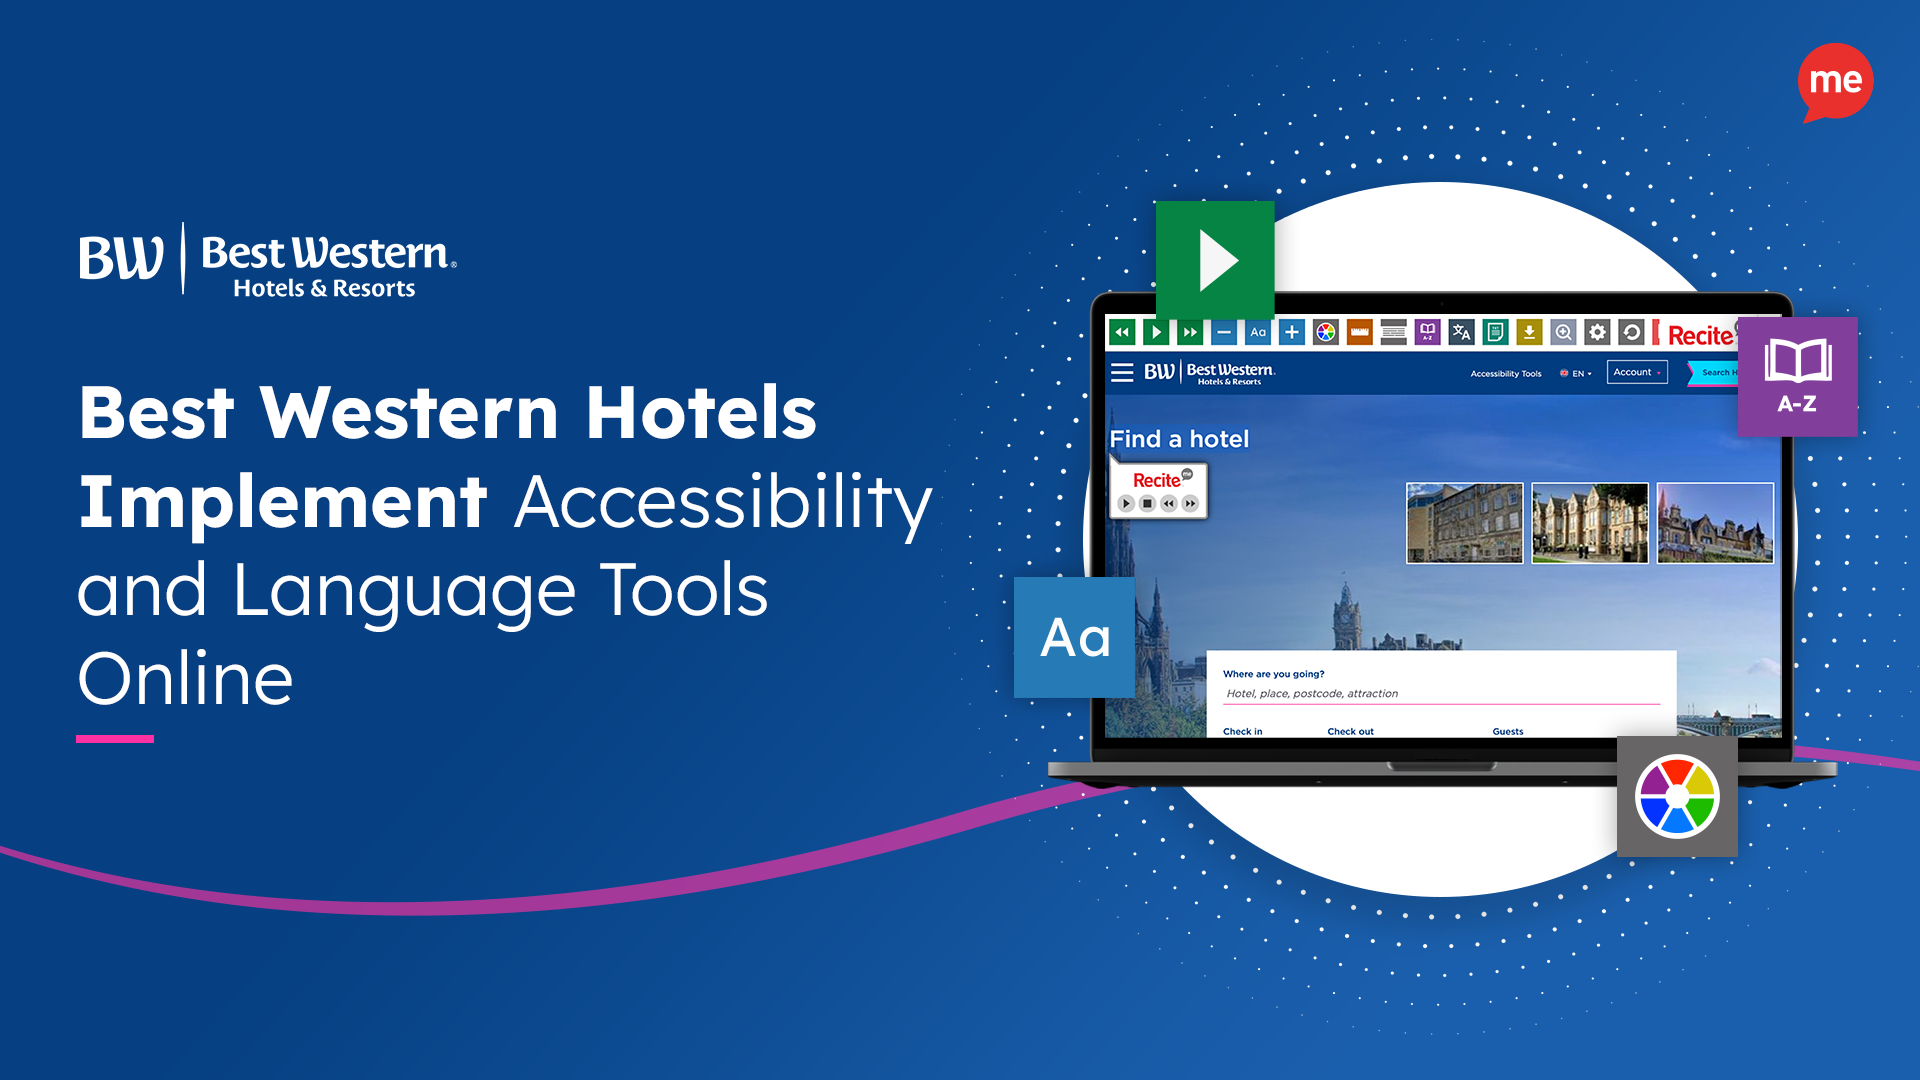 Best Western Hotels Implement Accessibility and Language Tools Online